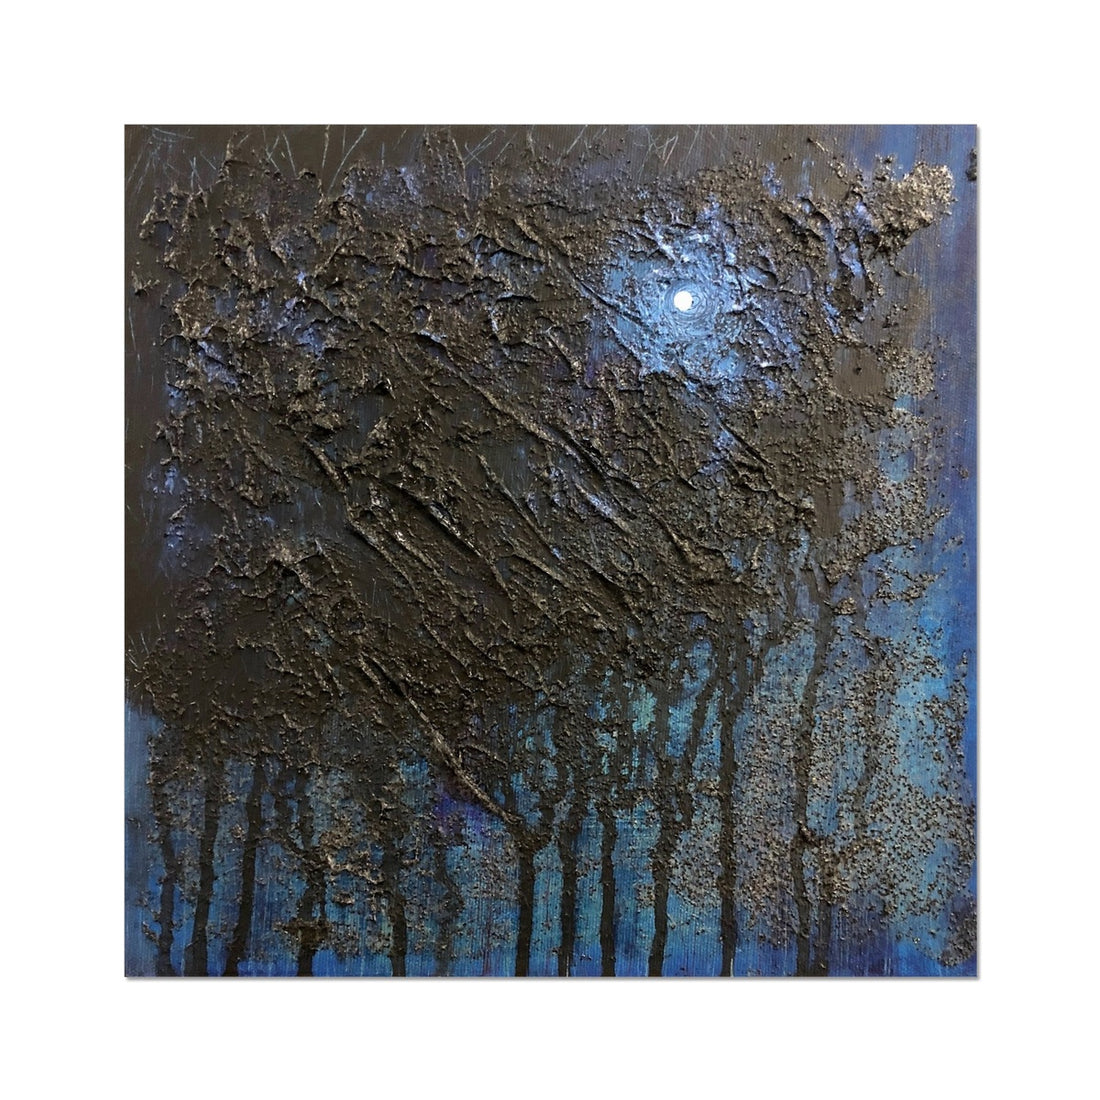 The Blue Moon Wood Abstract Painting | Artist Proof Collector Print | Paintings from Scotland by Scottish Artist Hunter